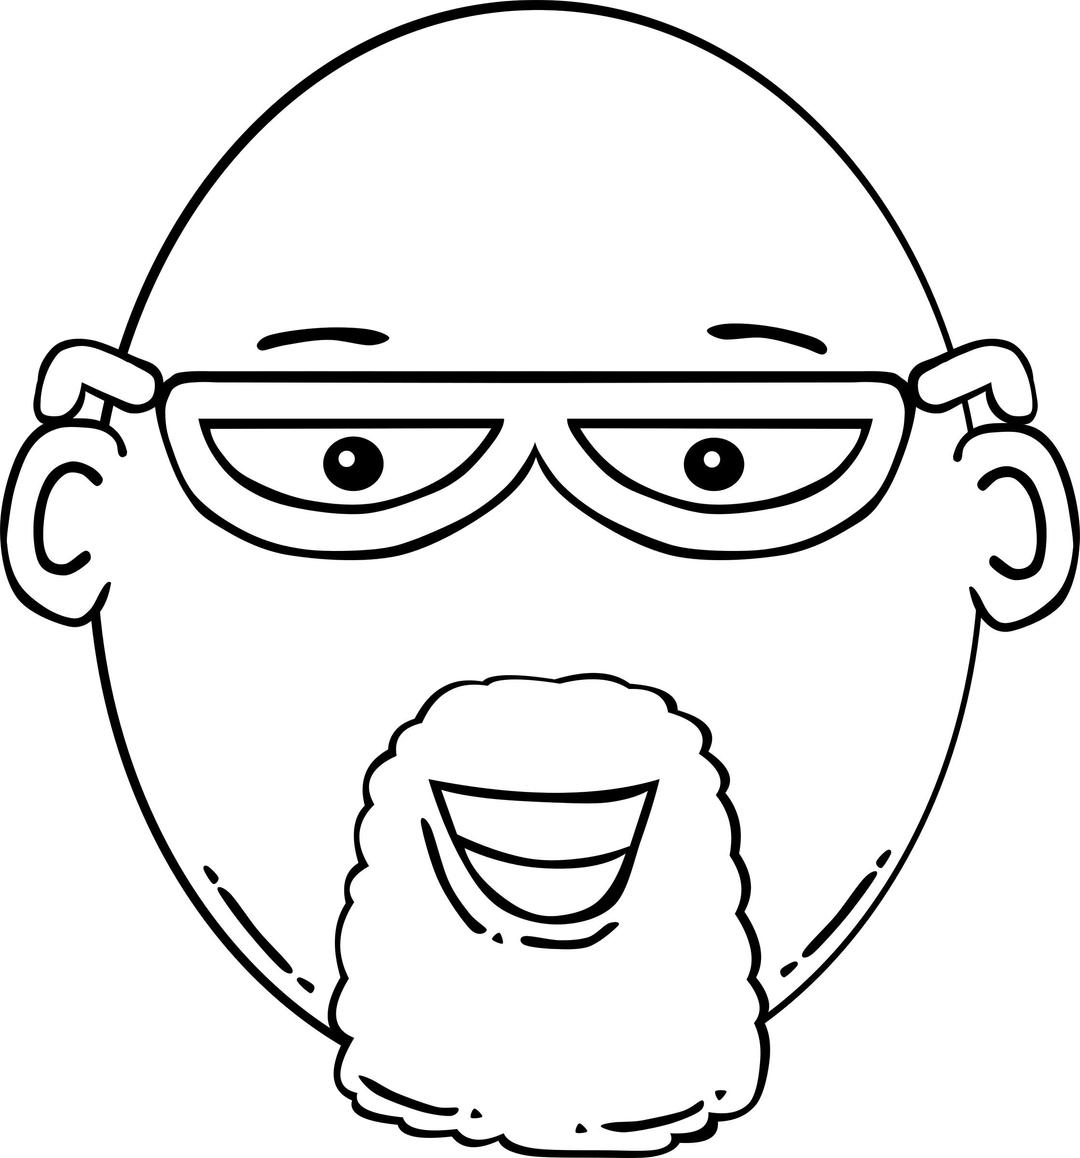 Man's Face from Worldlabel png transparent